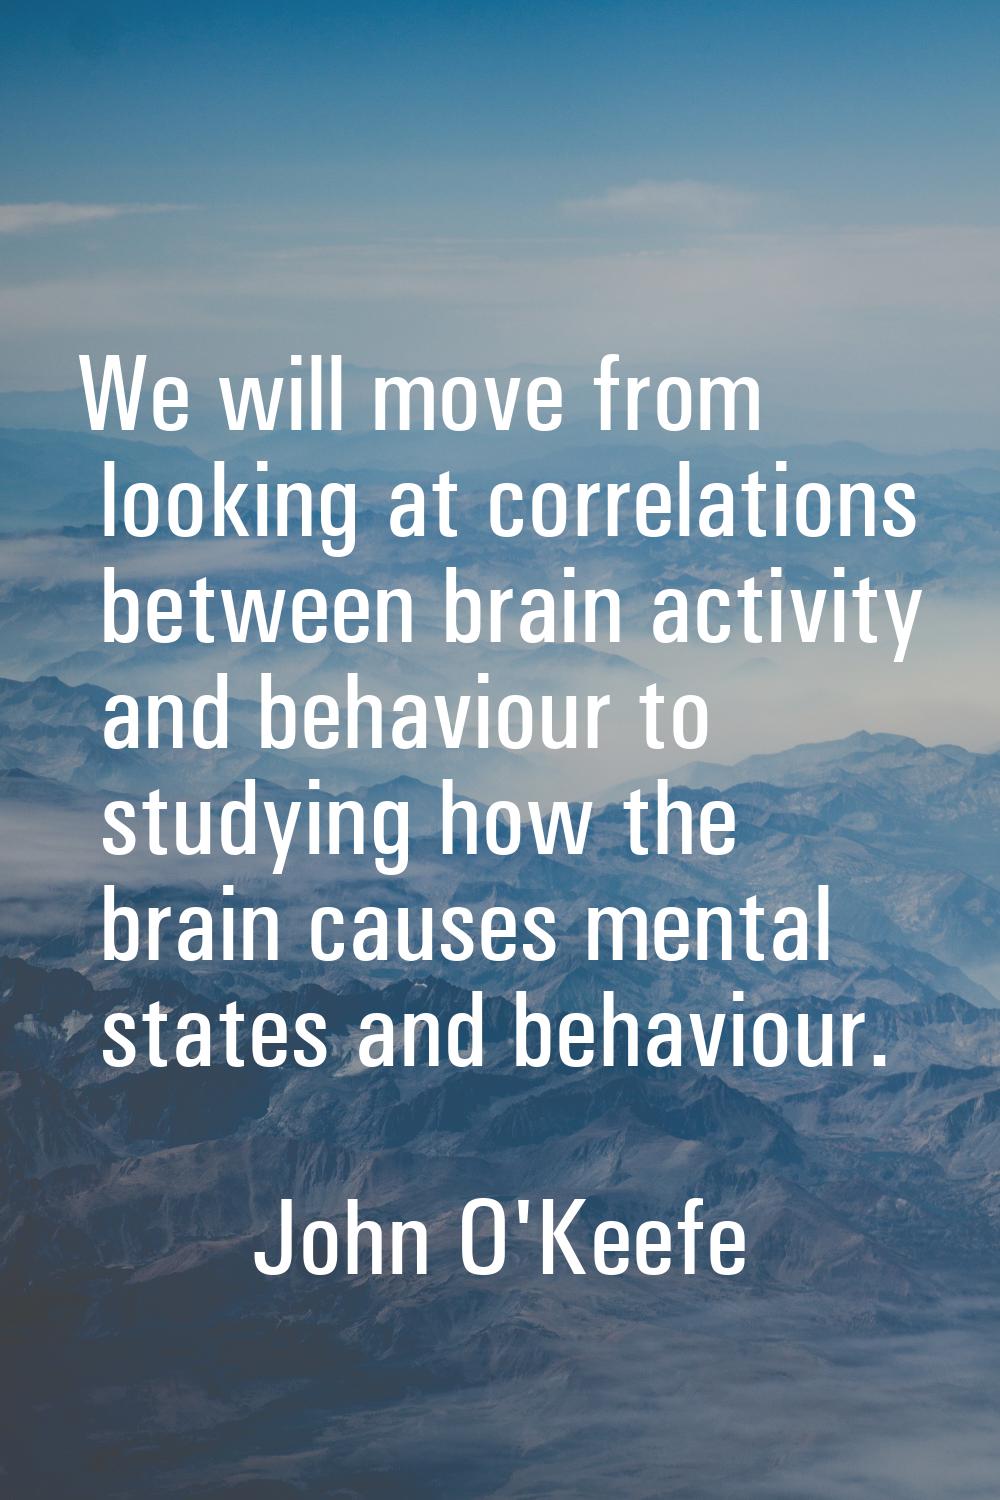 We will move from looking at correlations between brain activity and behaviour to studying how the 